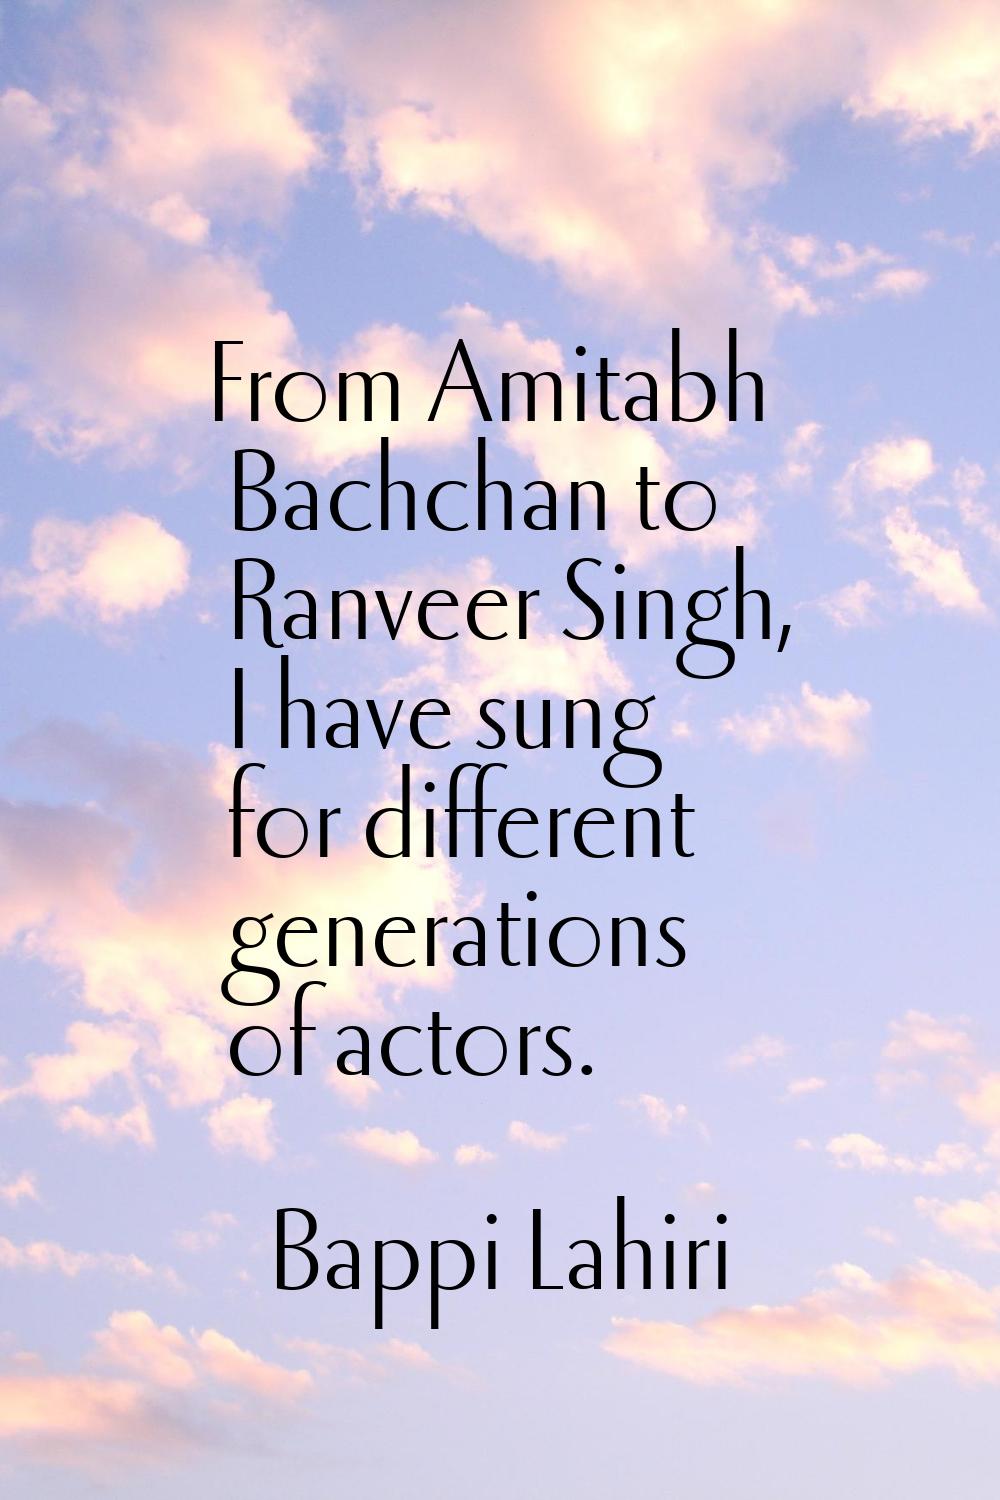 From Amitabh Bachchan to Ranveer Singh, I have sung for different generations of actors.